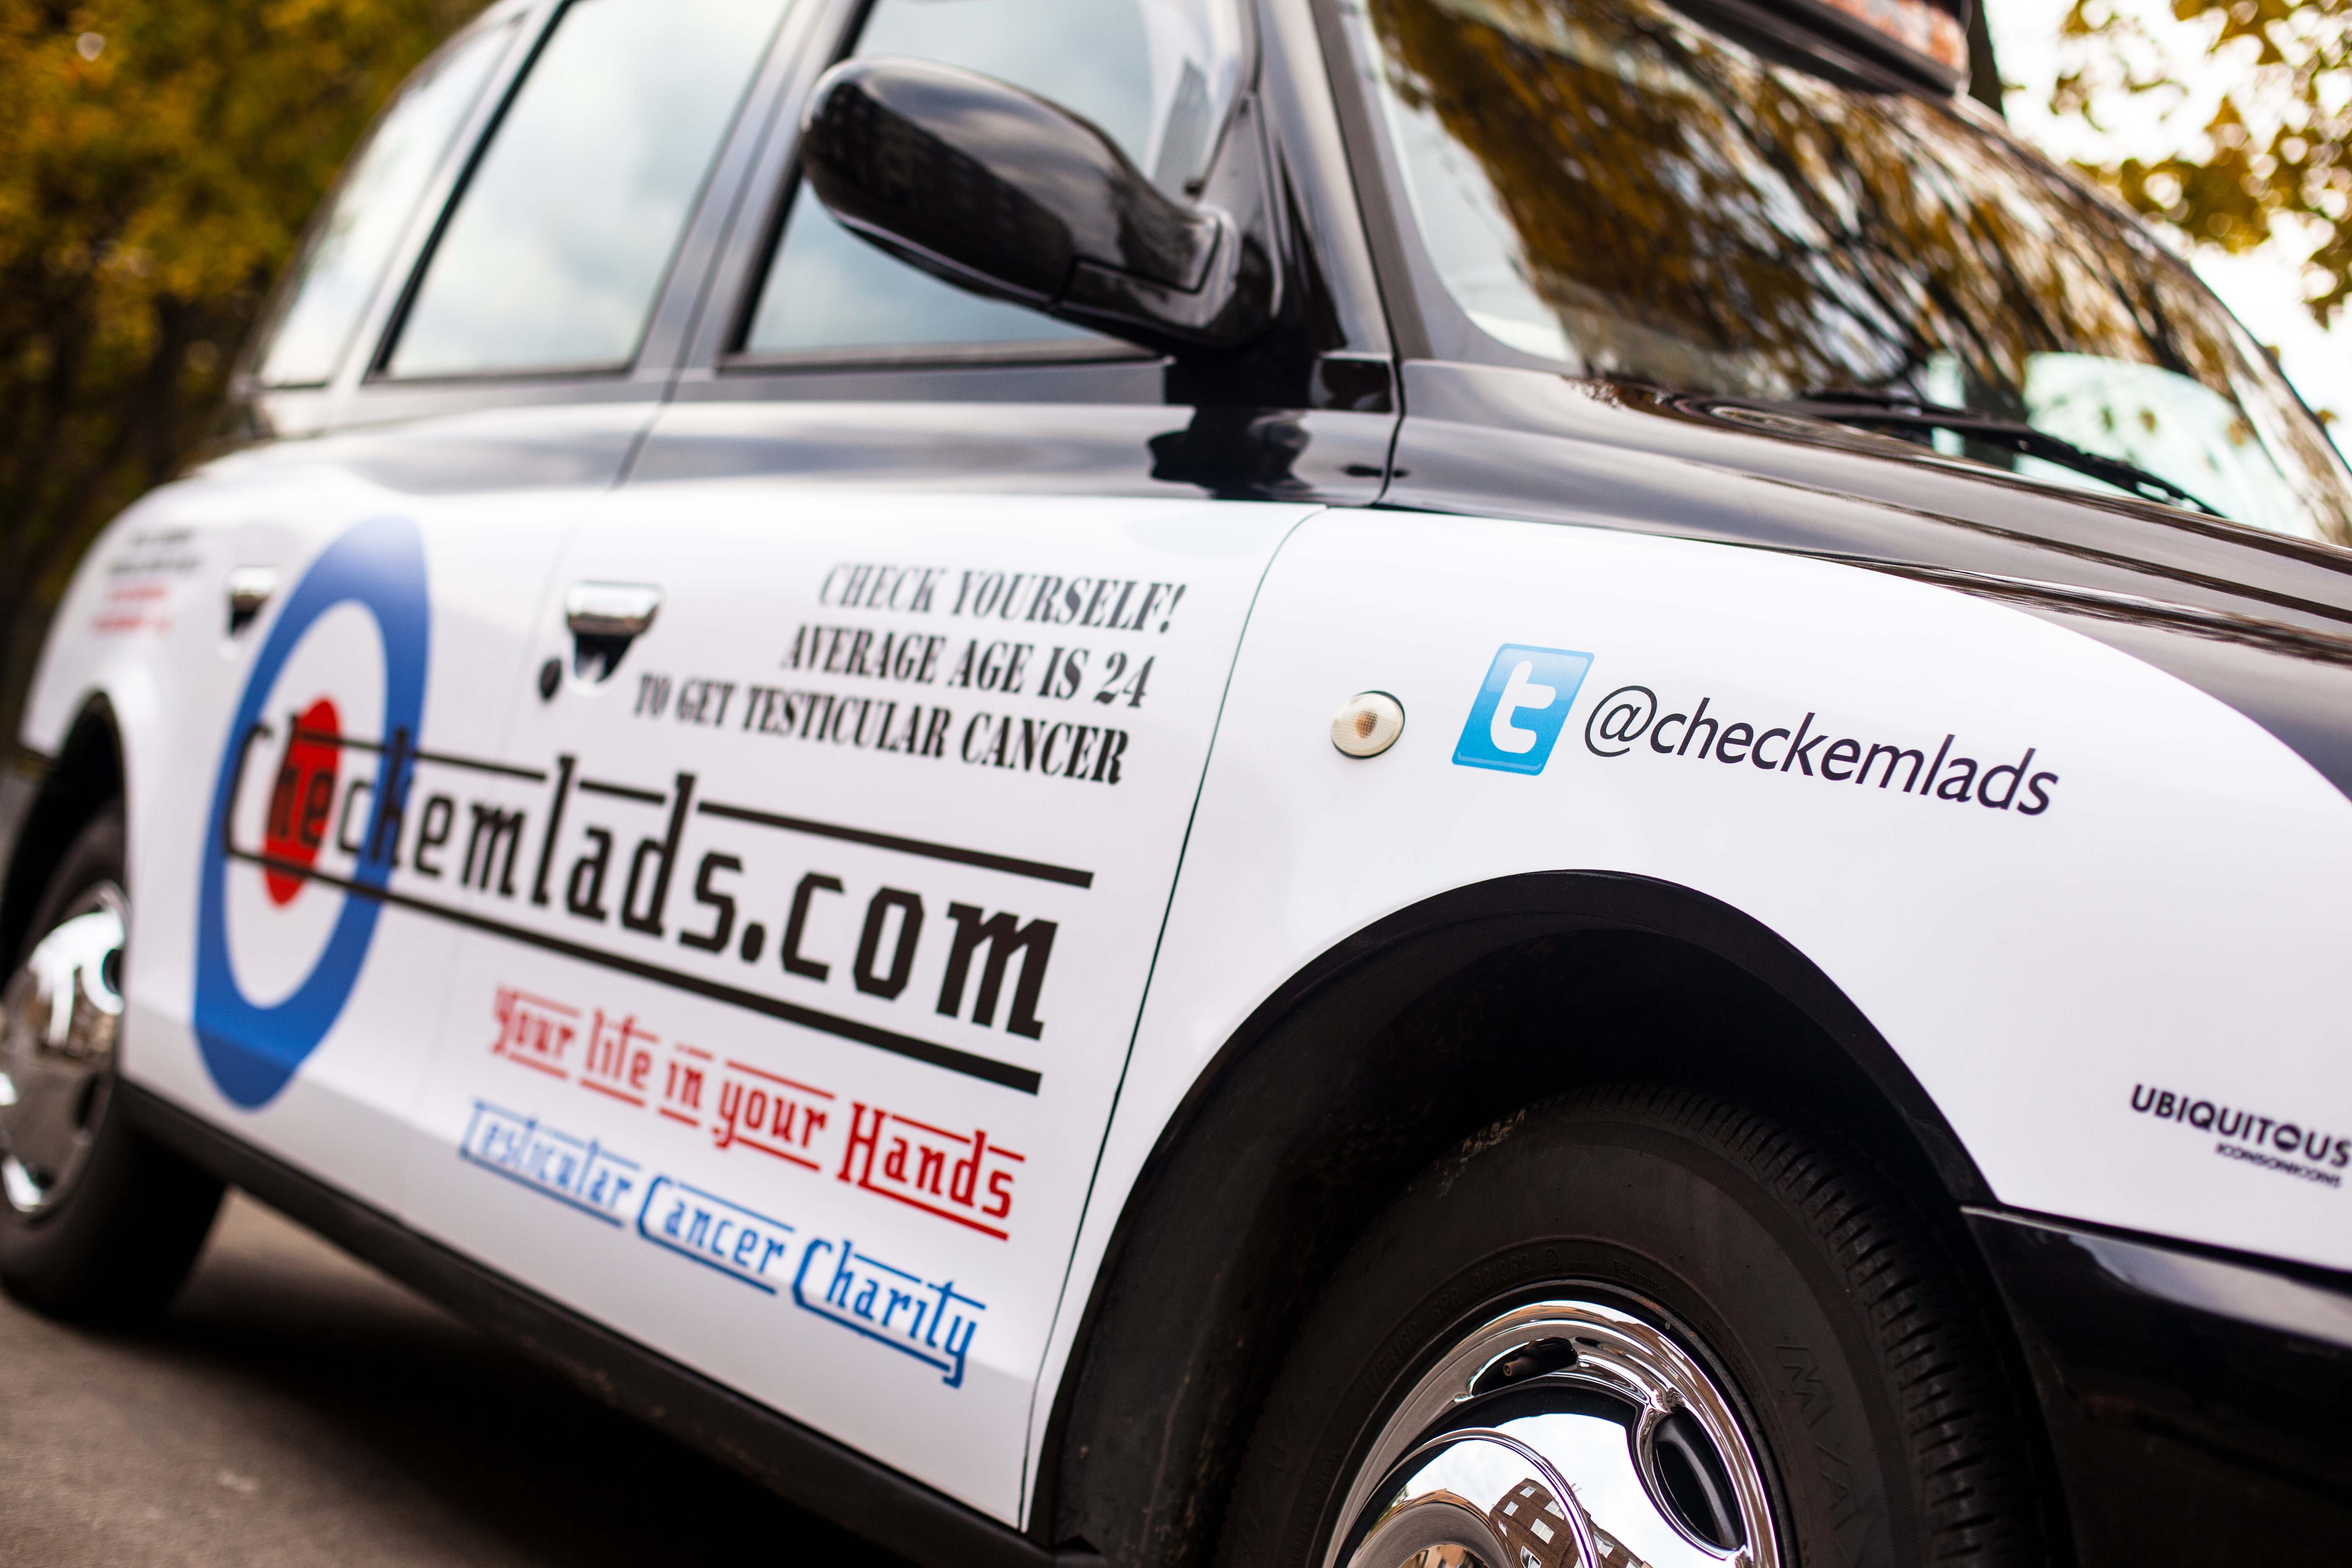 2012 Ubiquitous taxi advertising campaign for Check em Lads - Your life in your hands